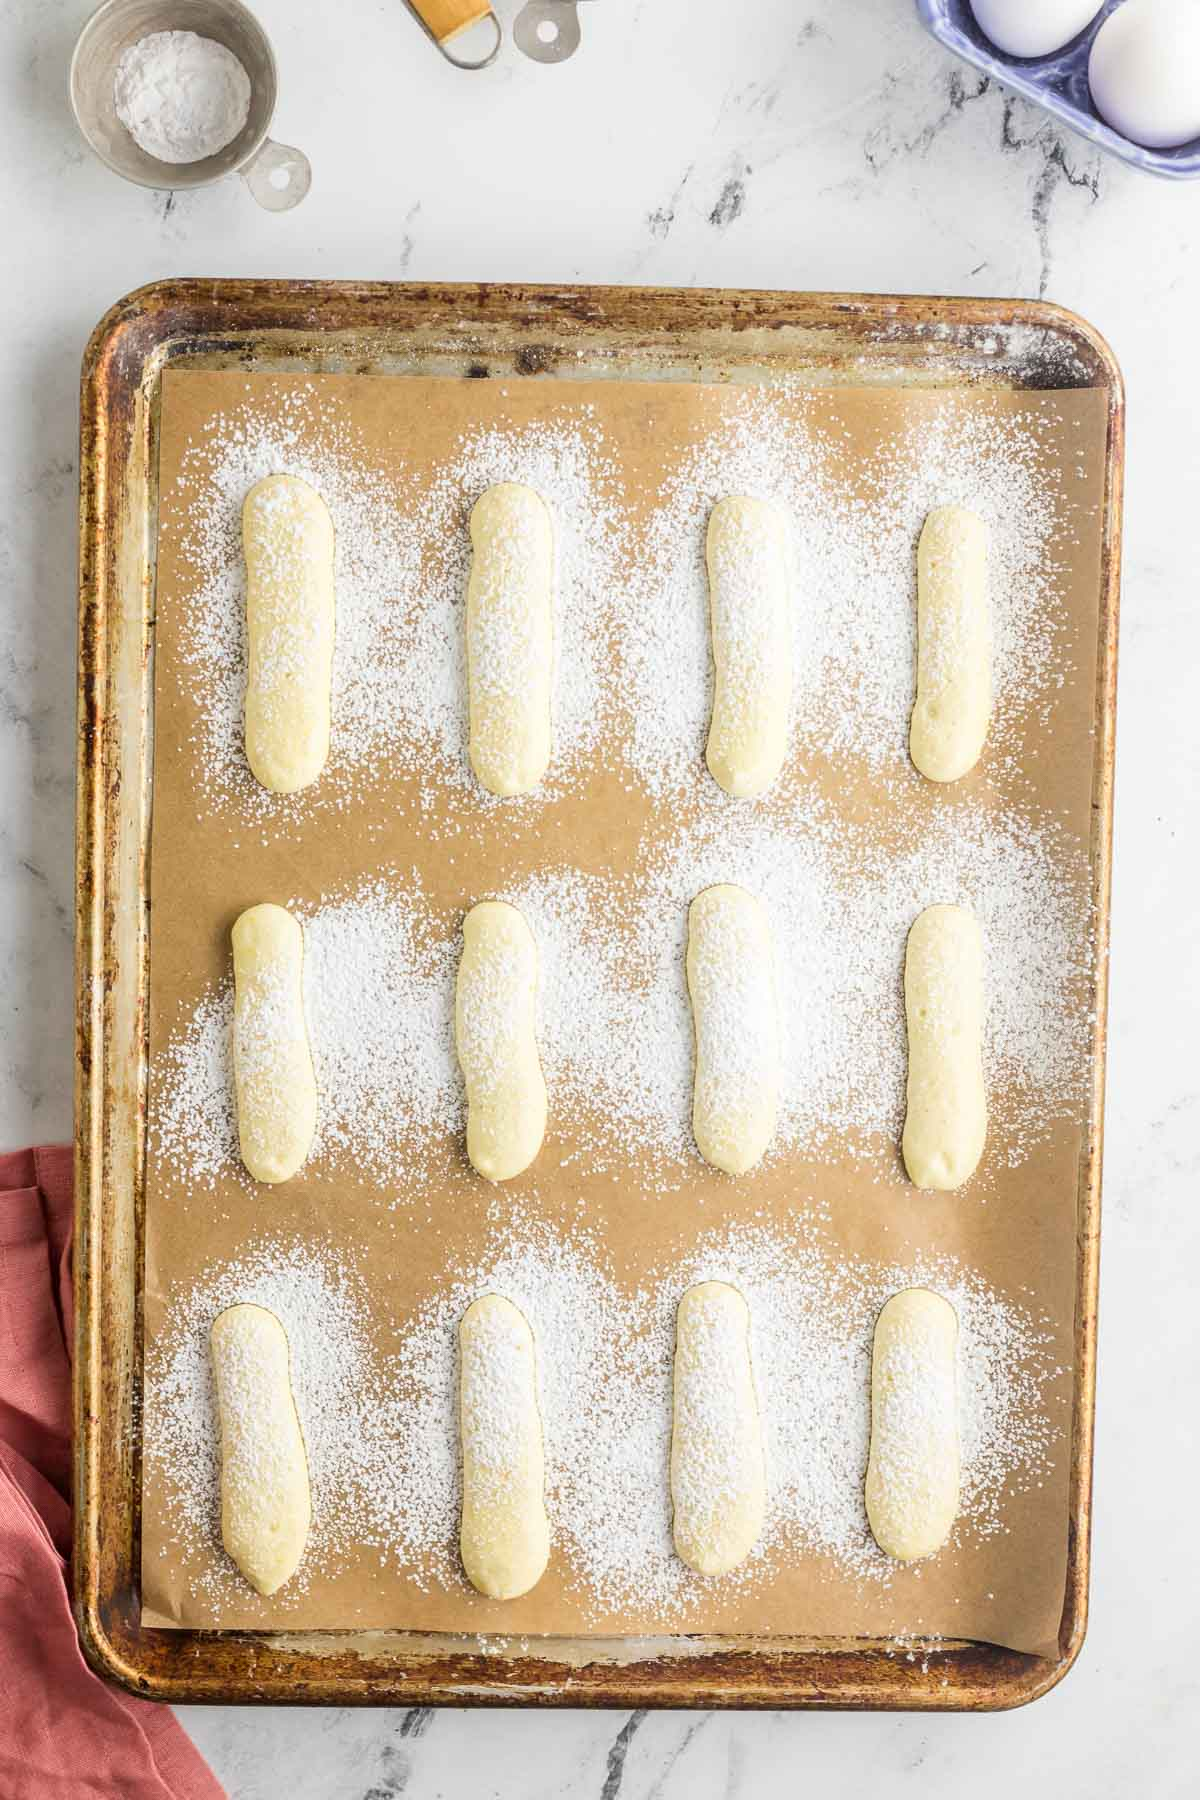 baking sheet of piped lady finger cookies dusted with powdered sugar